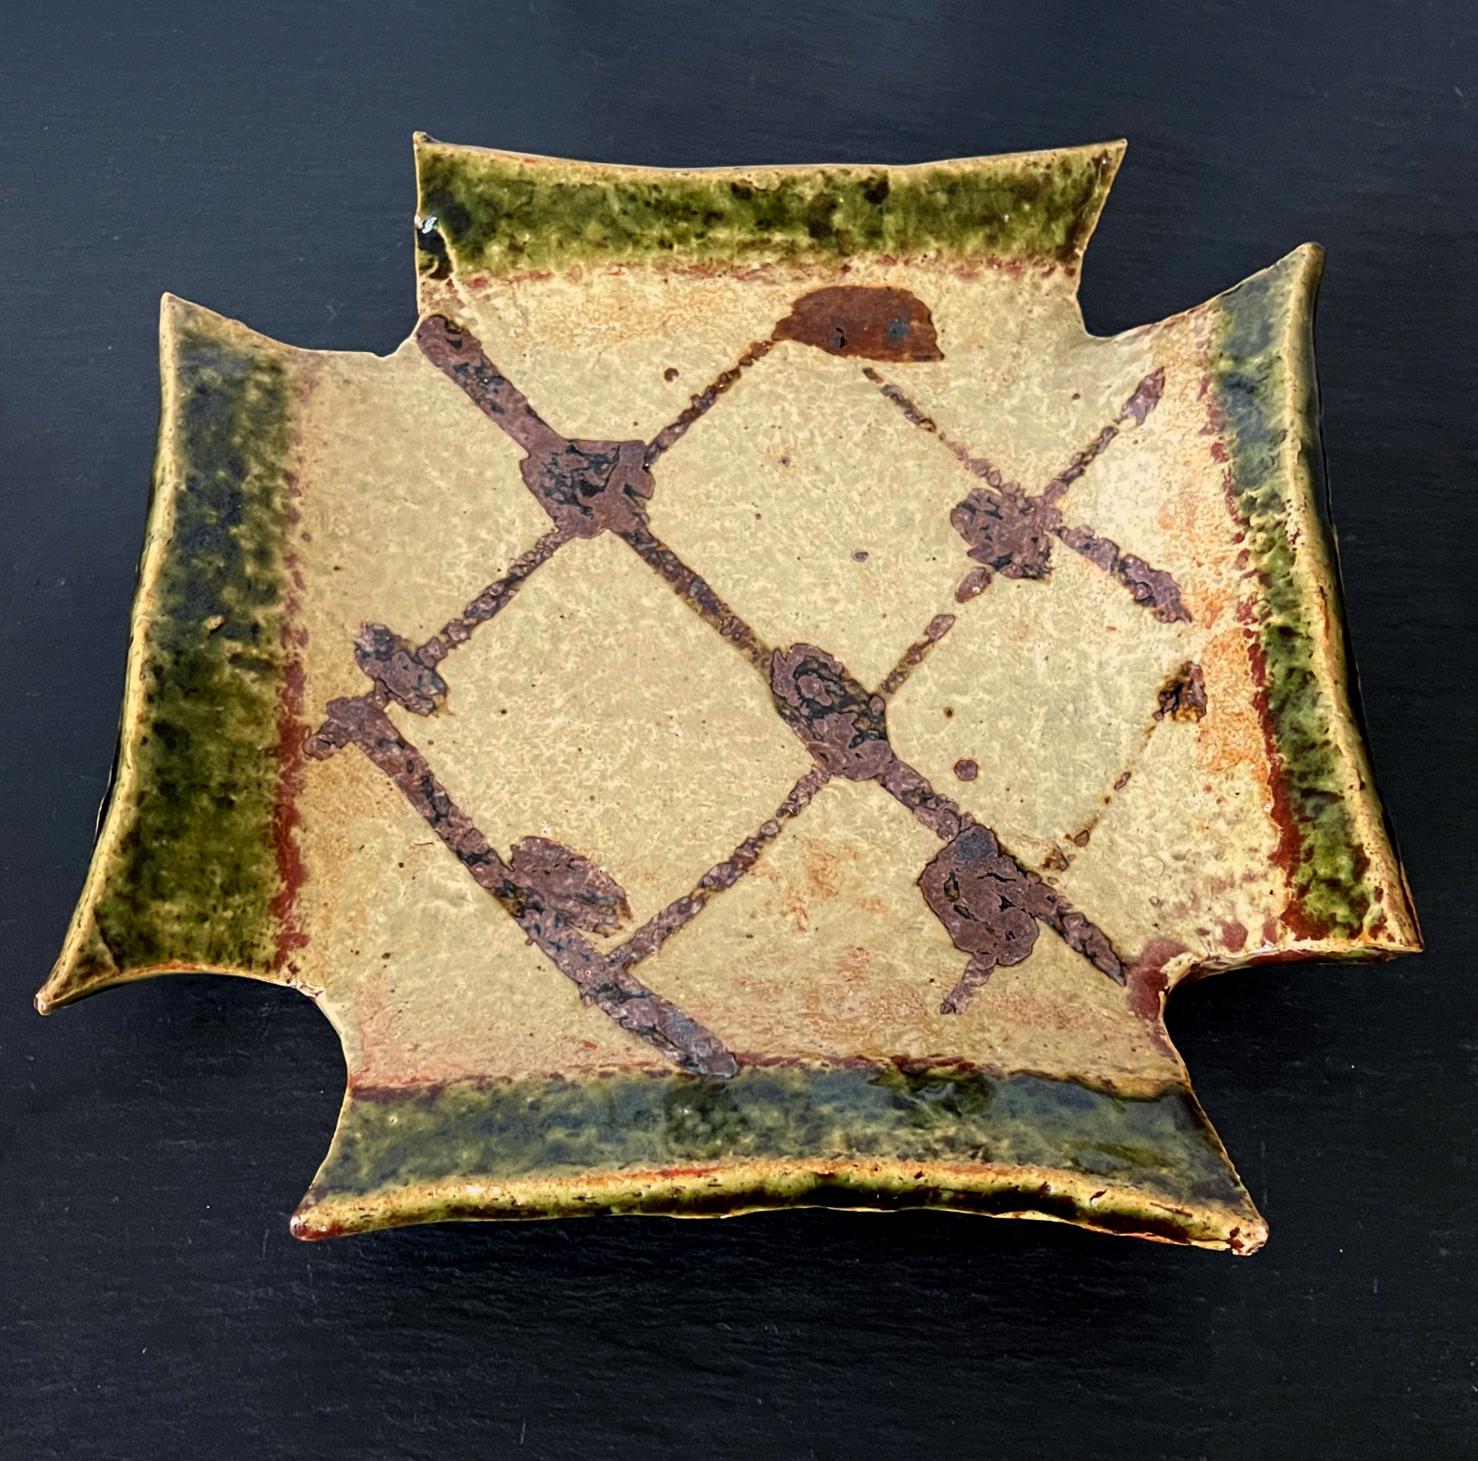 An oribe stoneware square dish with four notched corners and up-turned edges made by Kitaoji Rosanjin (1883-1959) circa 1950s. The Mingei style dish has a wonderful casual form with green glaze outlining the sharply shaped edges. The interior